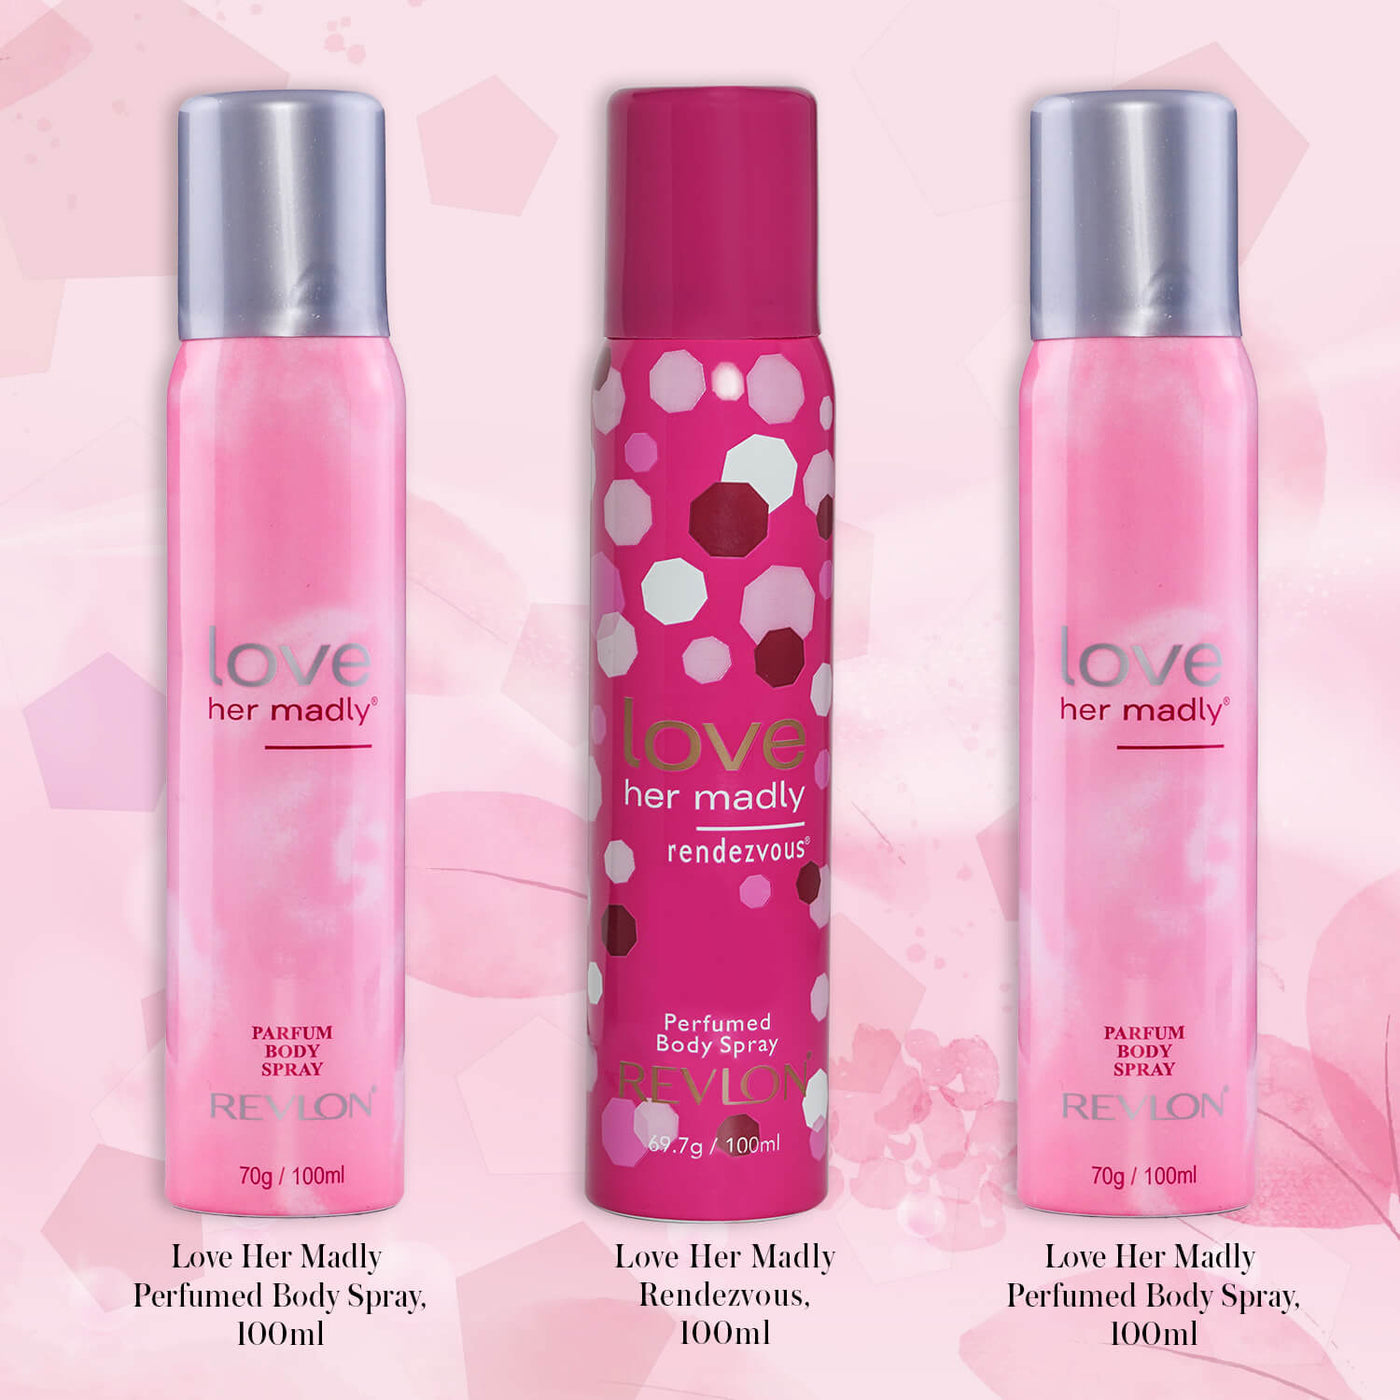 E-COM KIT (LOVE HER MADLY RENDEZVOUS PBS 100 ML + LOVE HER MADLY PBS 100 ML X 2U)